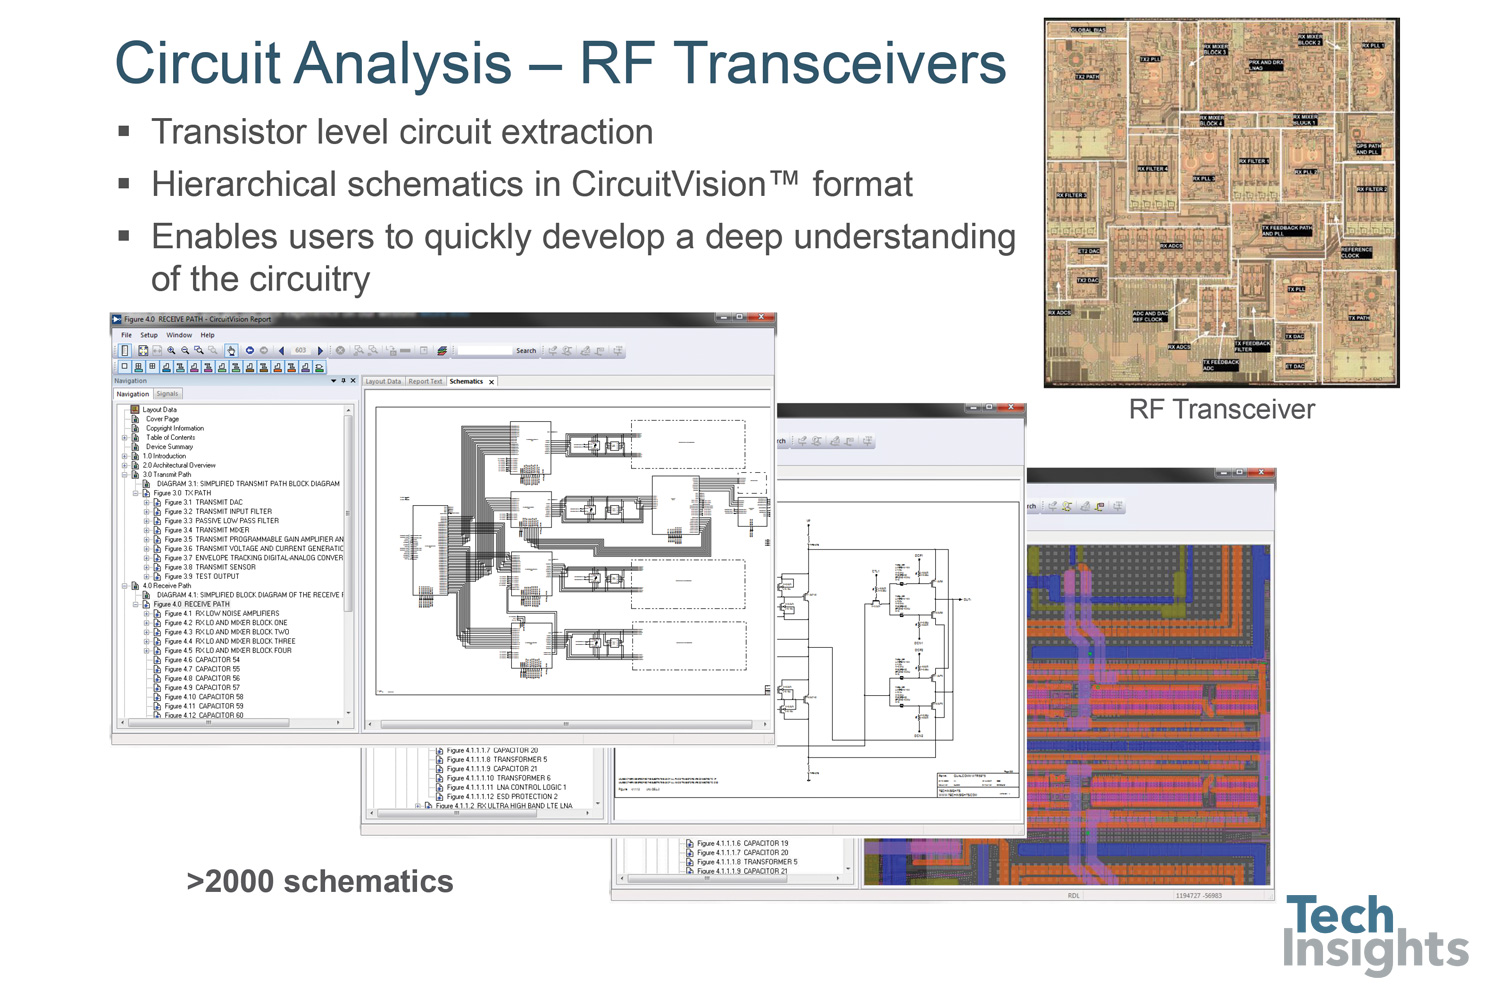 Transistor level circuit analysis of RF transceiver. This is a follow-on from the RF architecture analysis. This is a transistor level circuit reverse engineering analysis and is presented as a set of hierarchically-arranged schematics